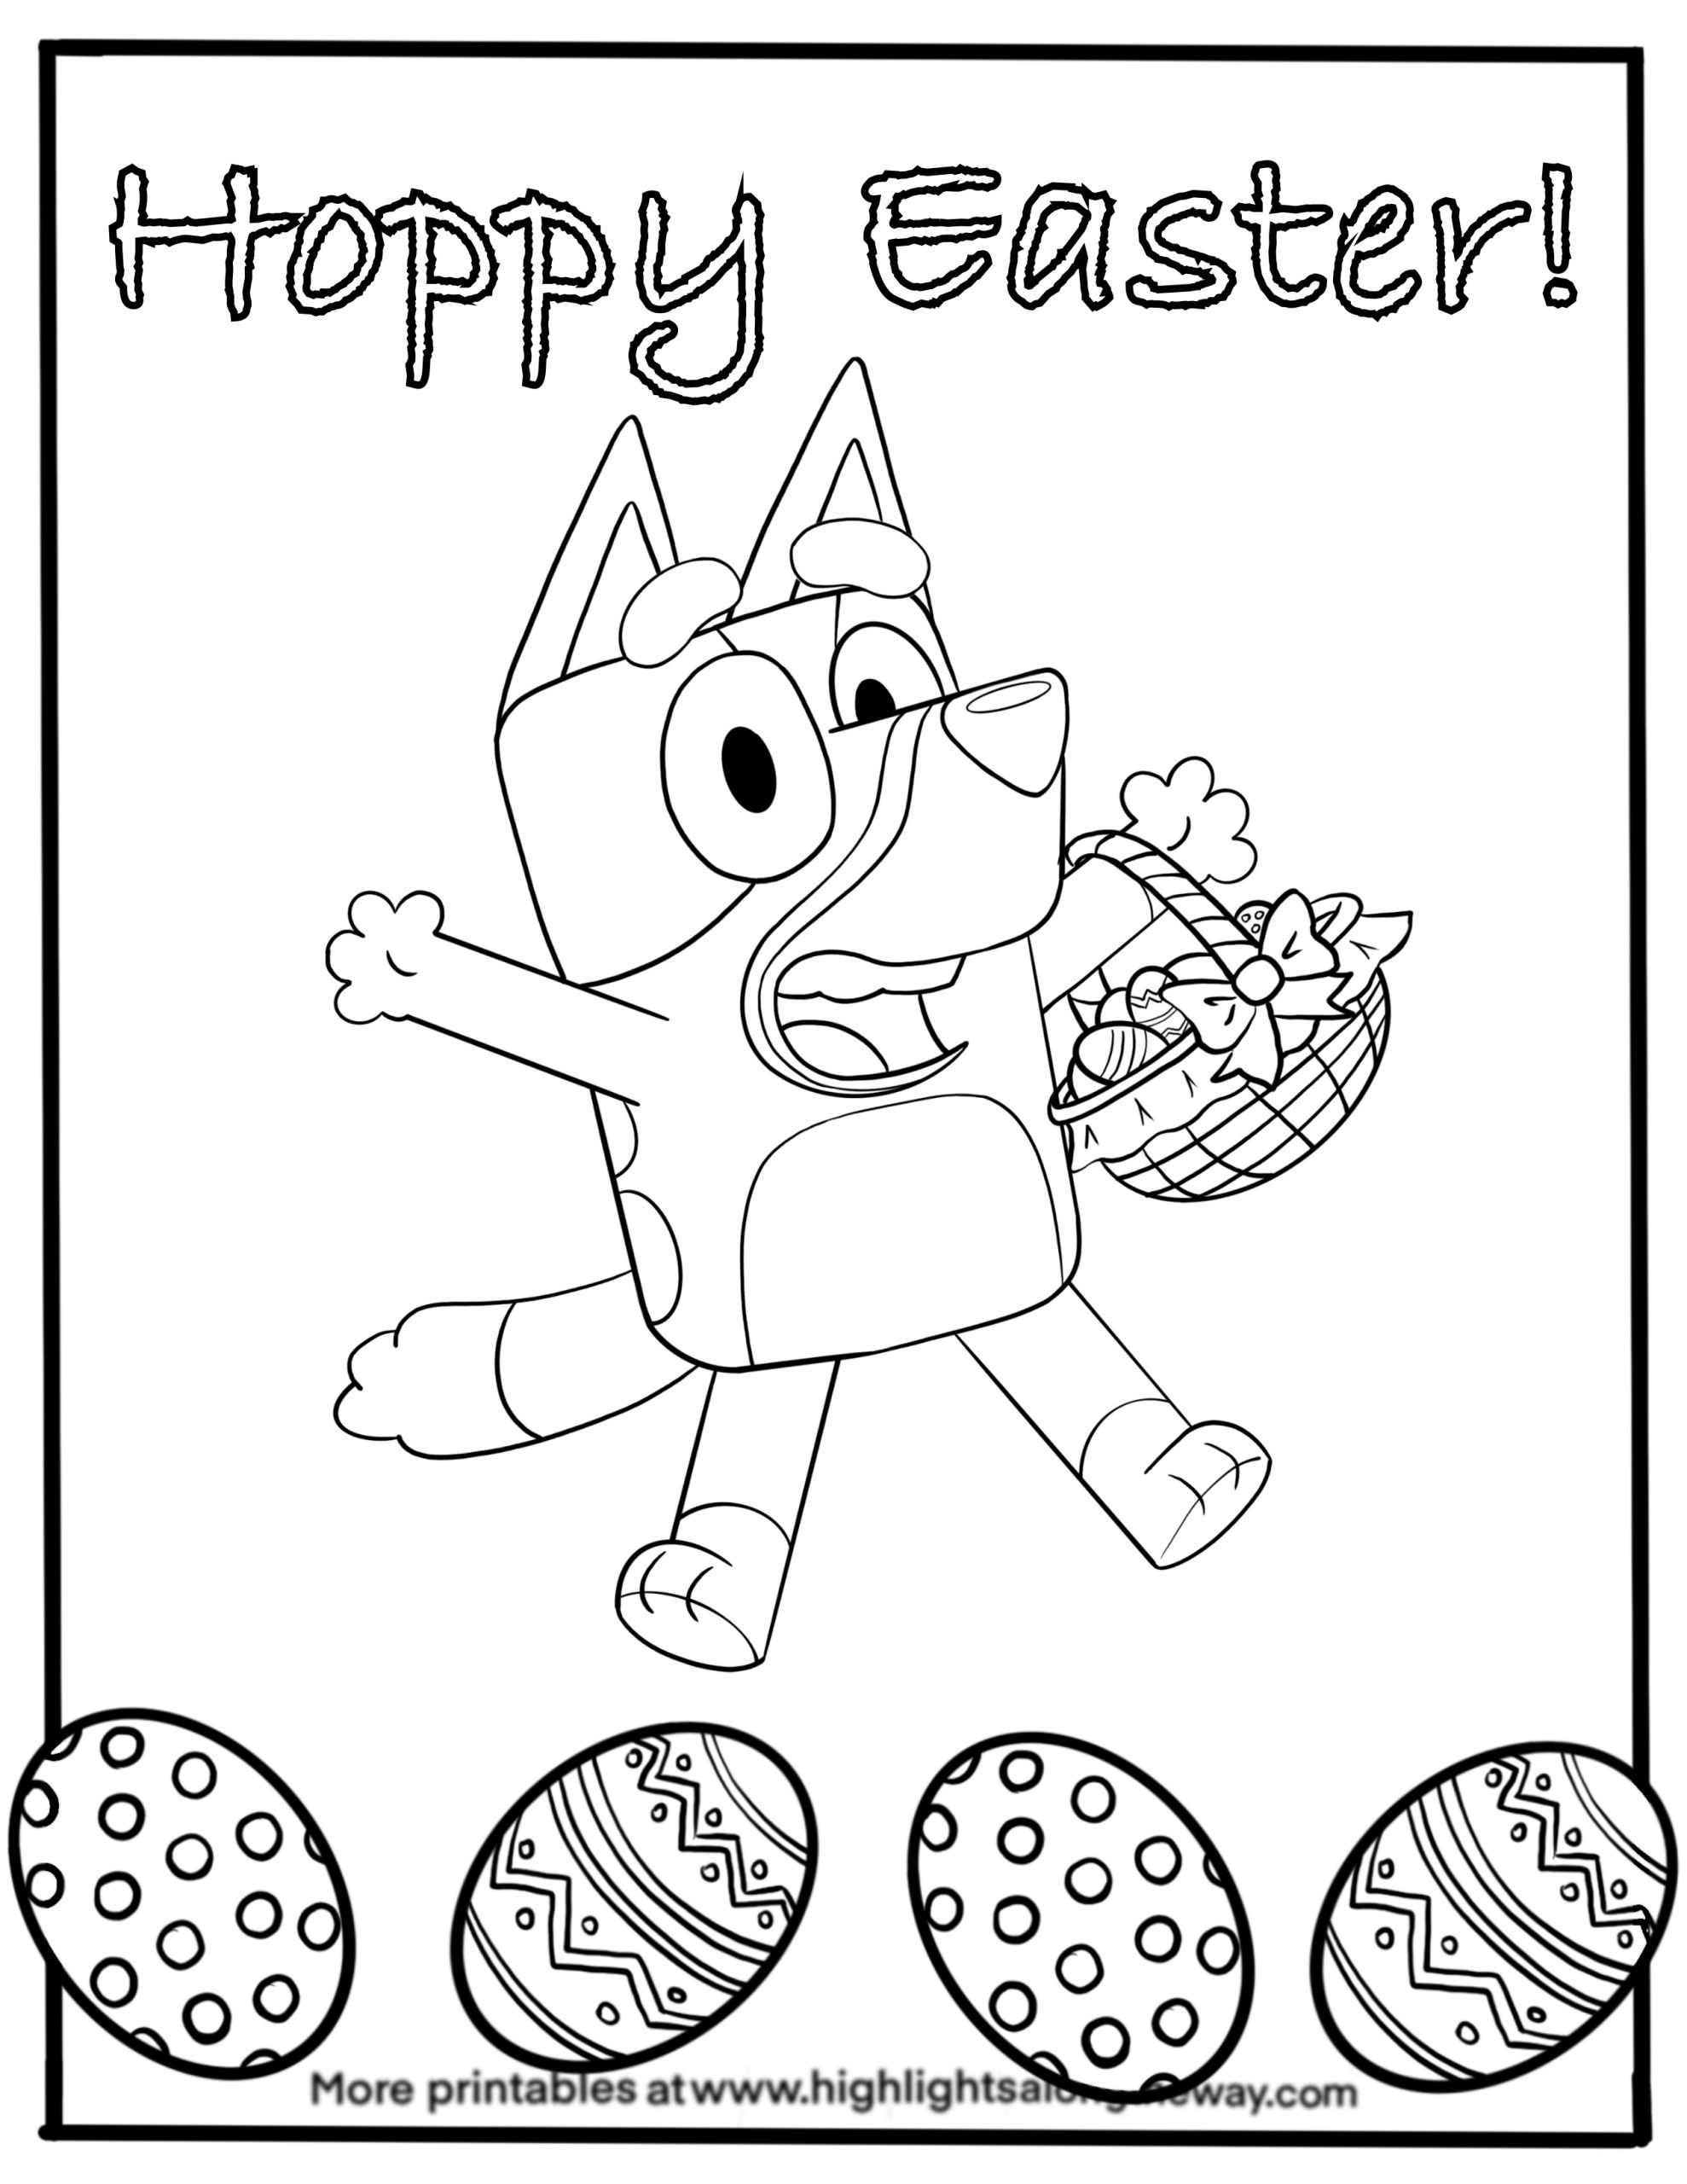 Free printables coloring and activity sheets of popular cartoons and more!